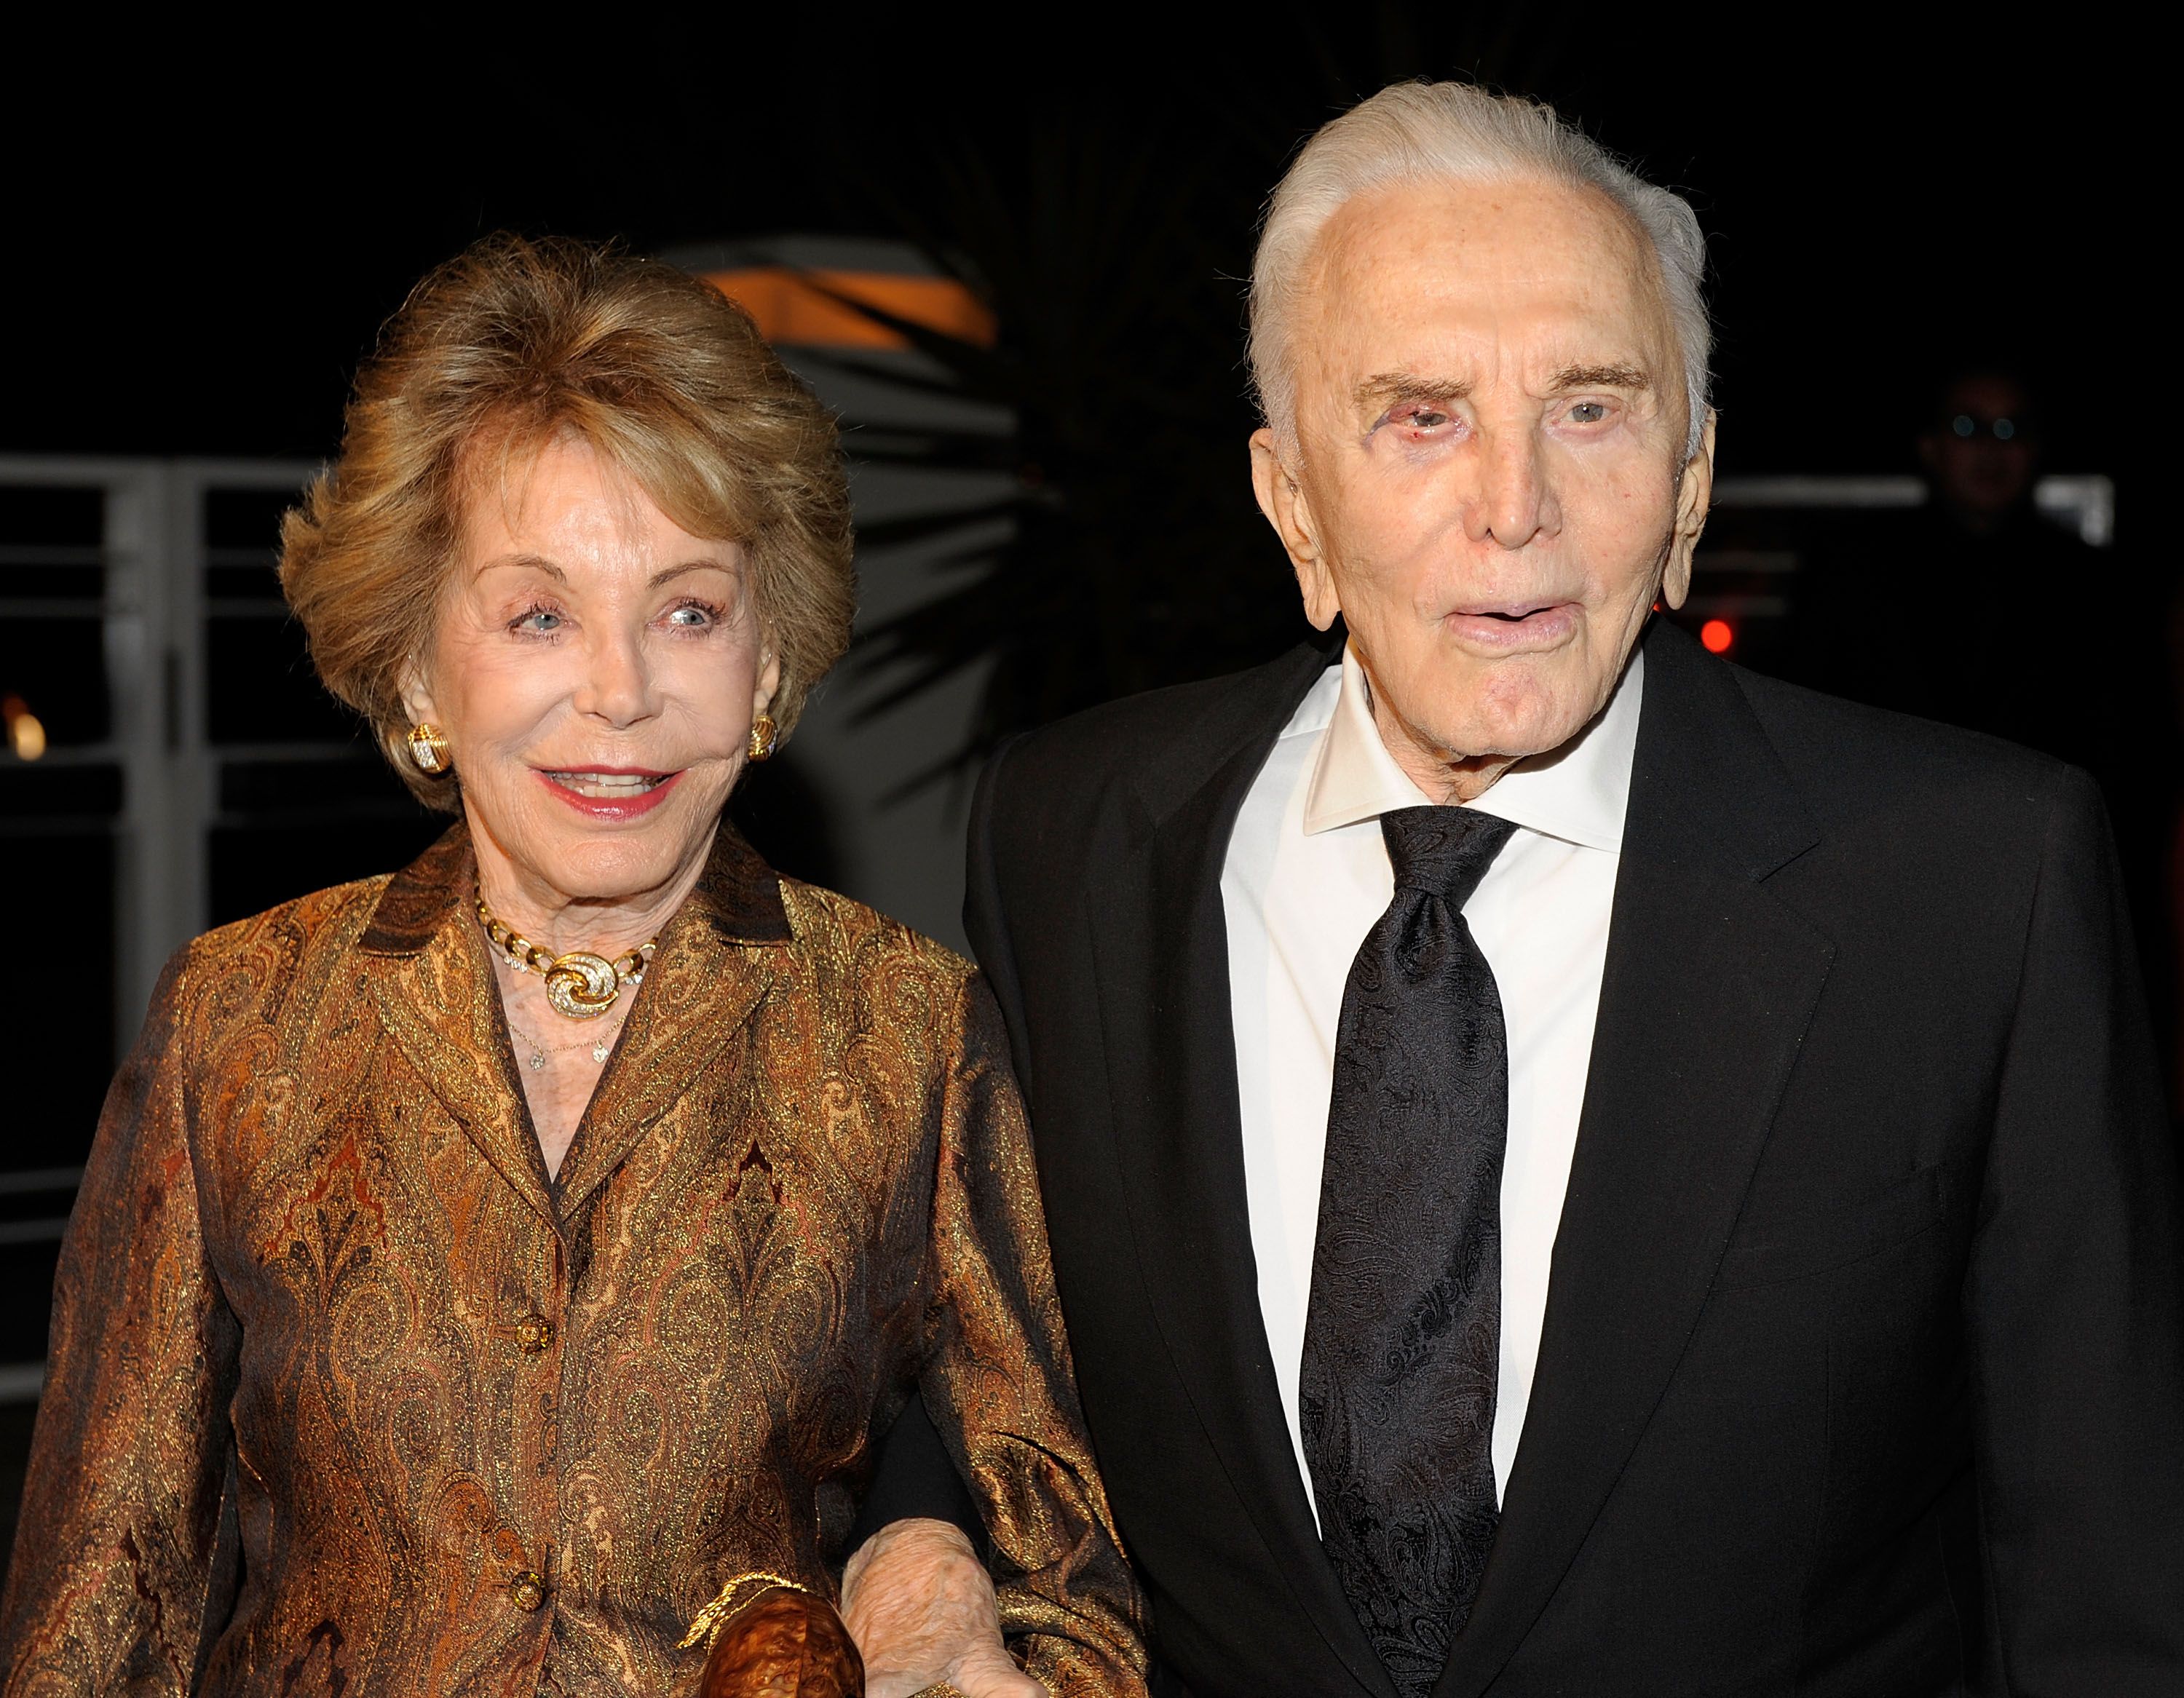 Anne Douglas and Kirk Douglas at the 4th Annual Kirk Douglas Award for Excellence in Film for the Santa Barbara International Film Festival on October 22, 2009 in Santa Barbara, California | Photo:Getty Images